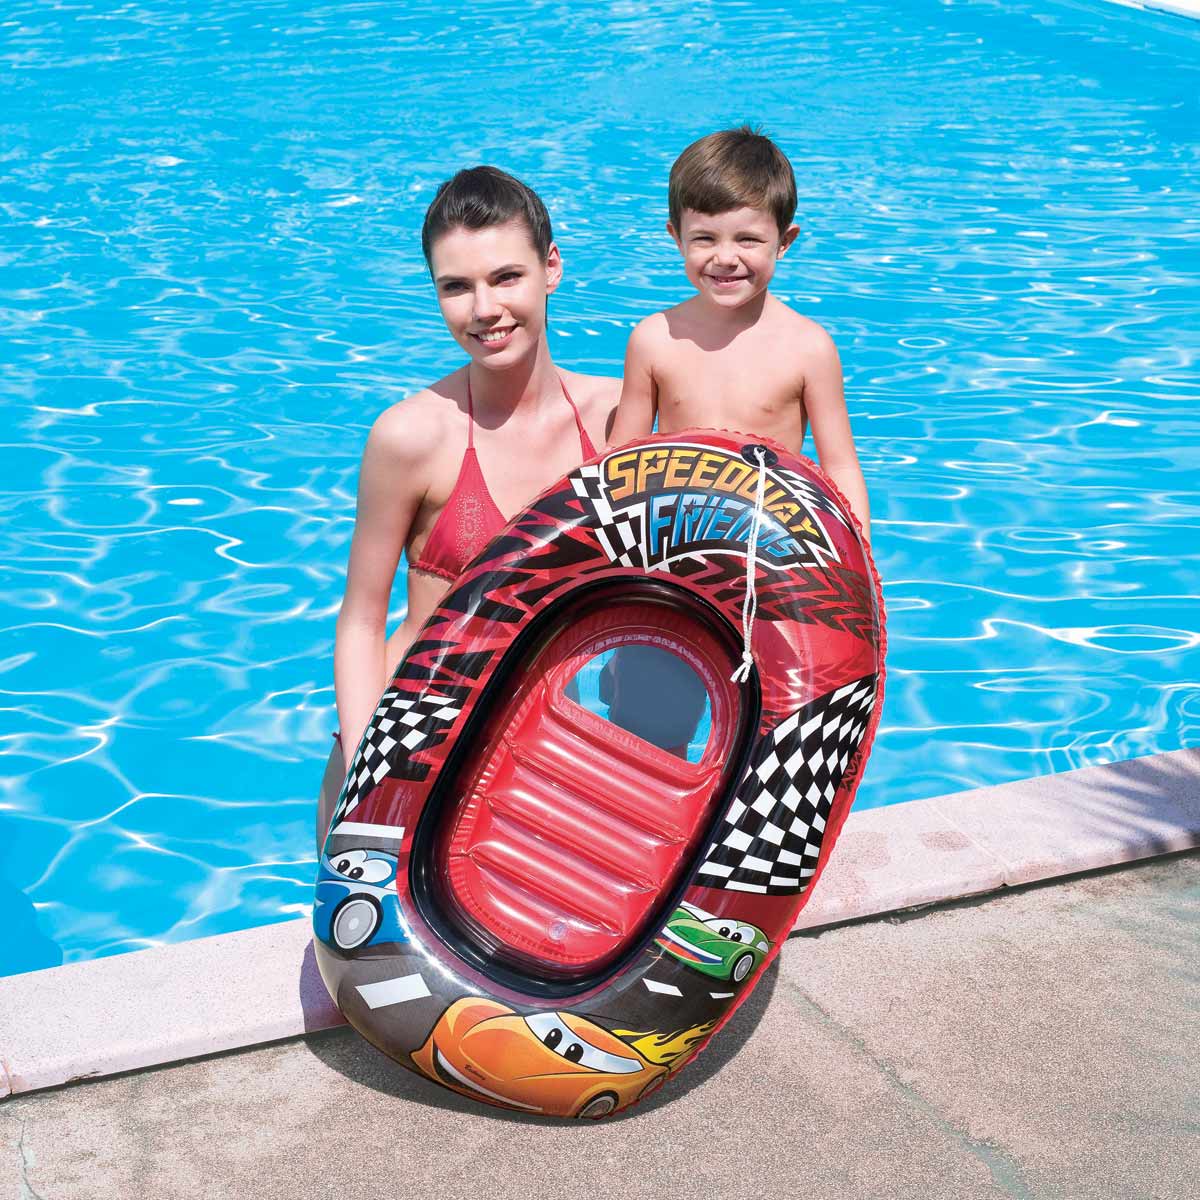 SPEEDWAY FRIENDS - Inflatable raft